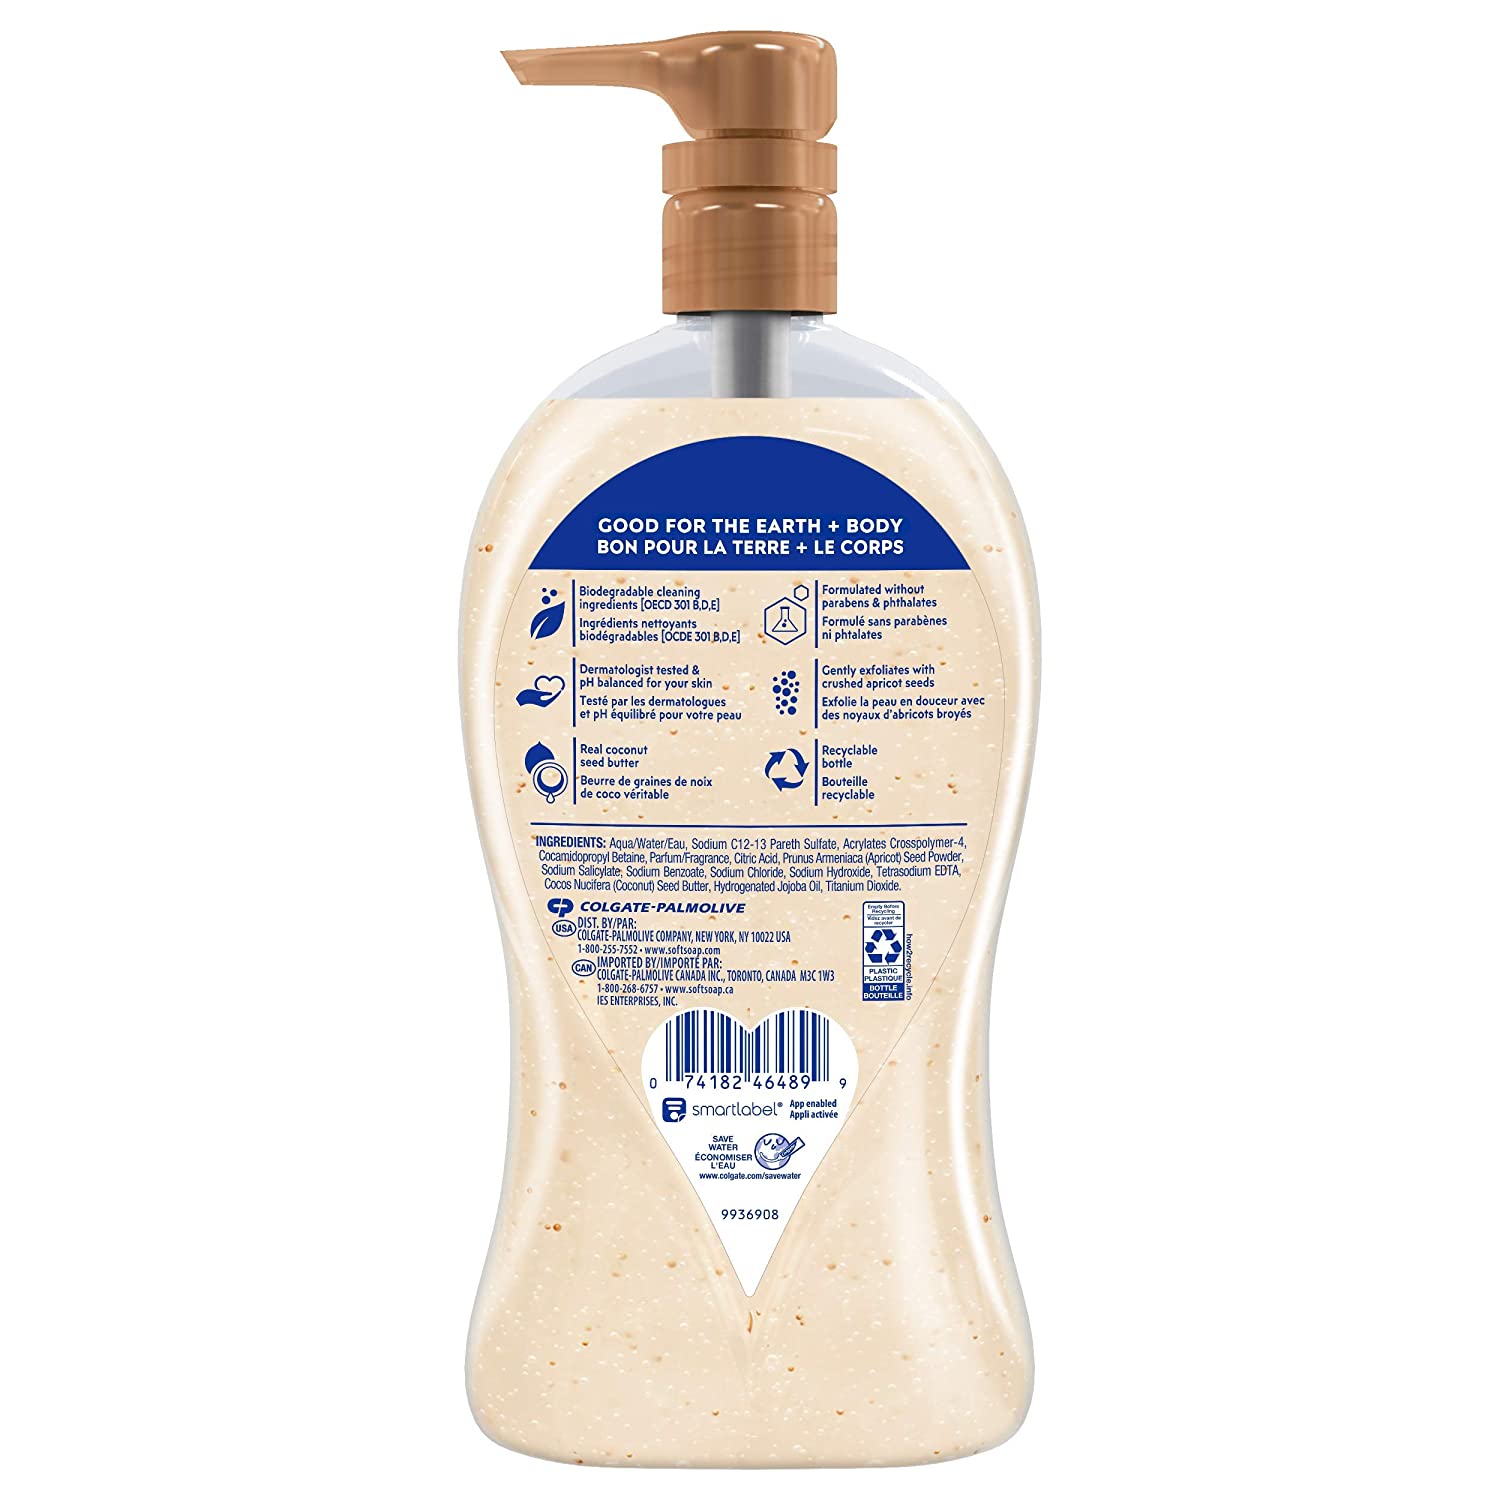 32-Oz Softsoap Exfoliating Body Wash Pump (Coconut Butter Scrub) $3.50 w/ S&S + Free Shipping w/ Prime or on orders over $25